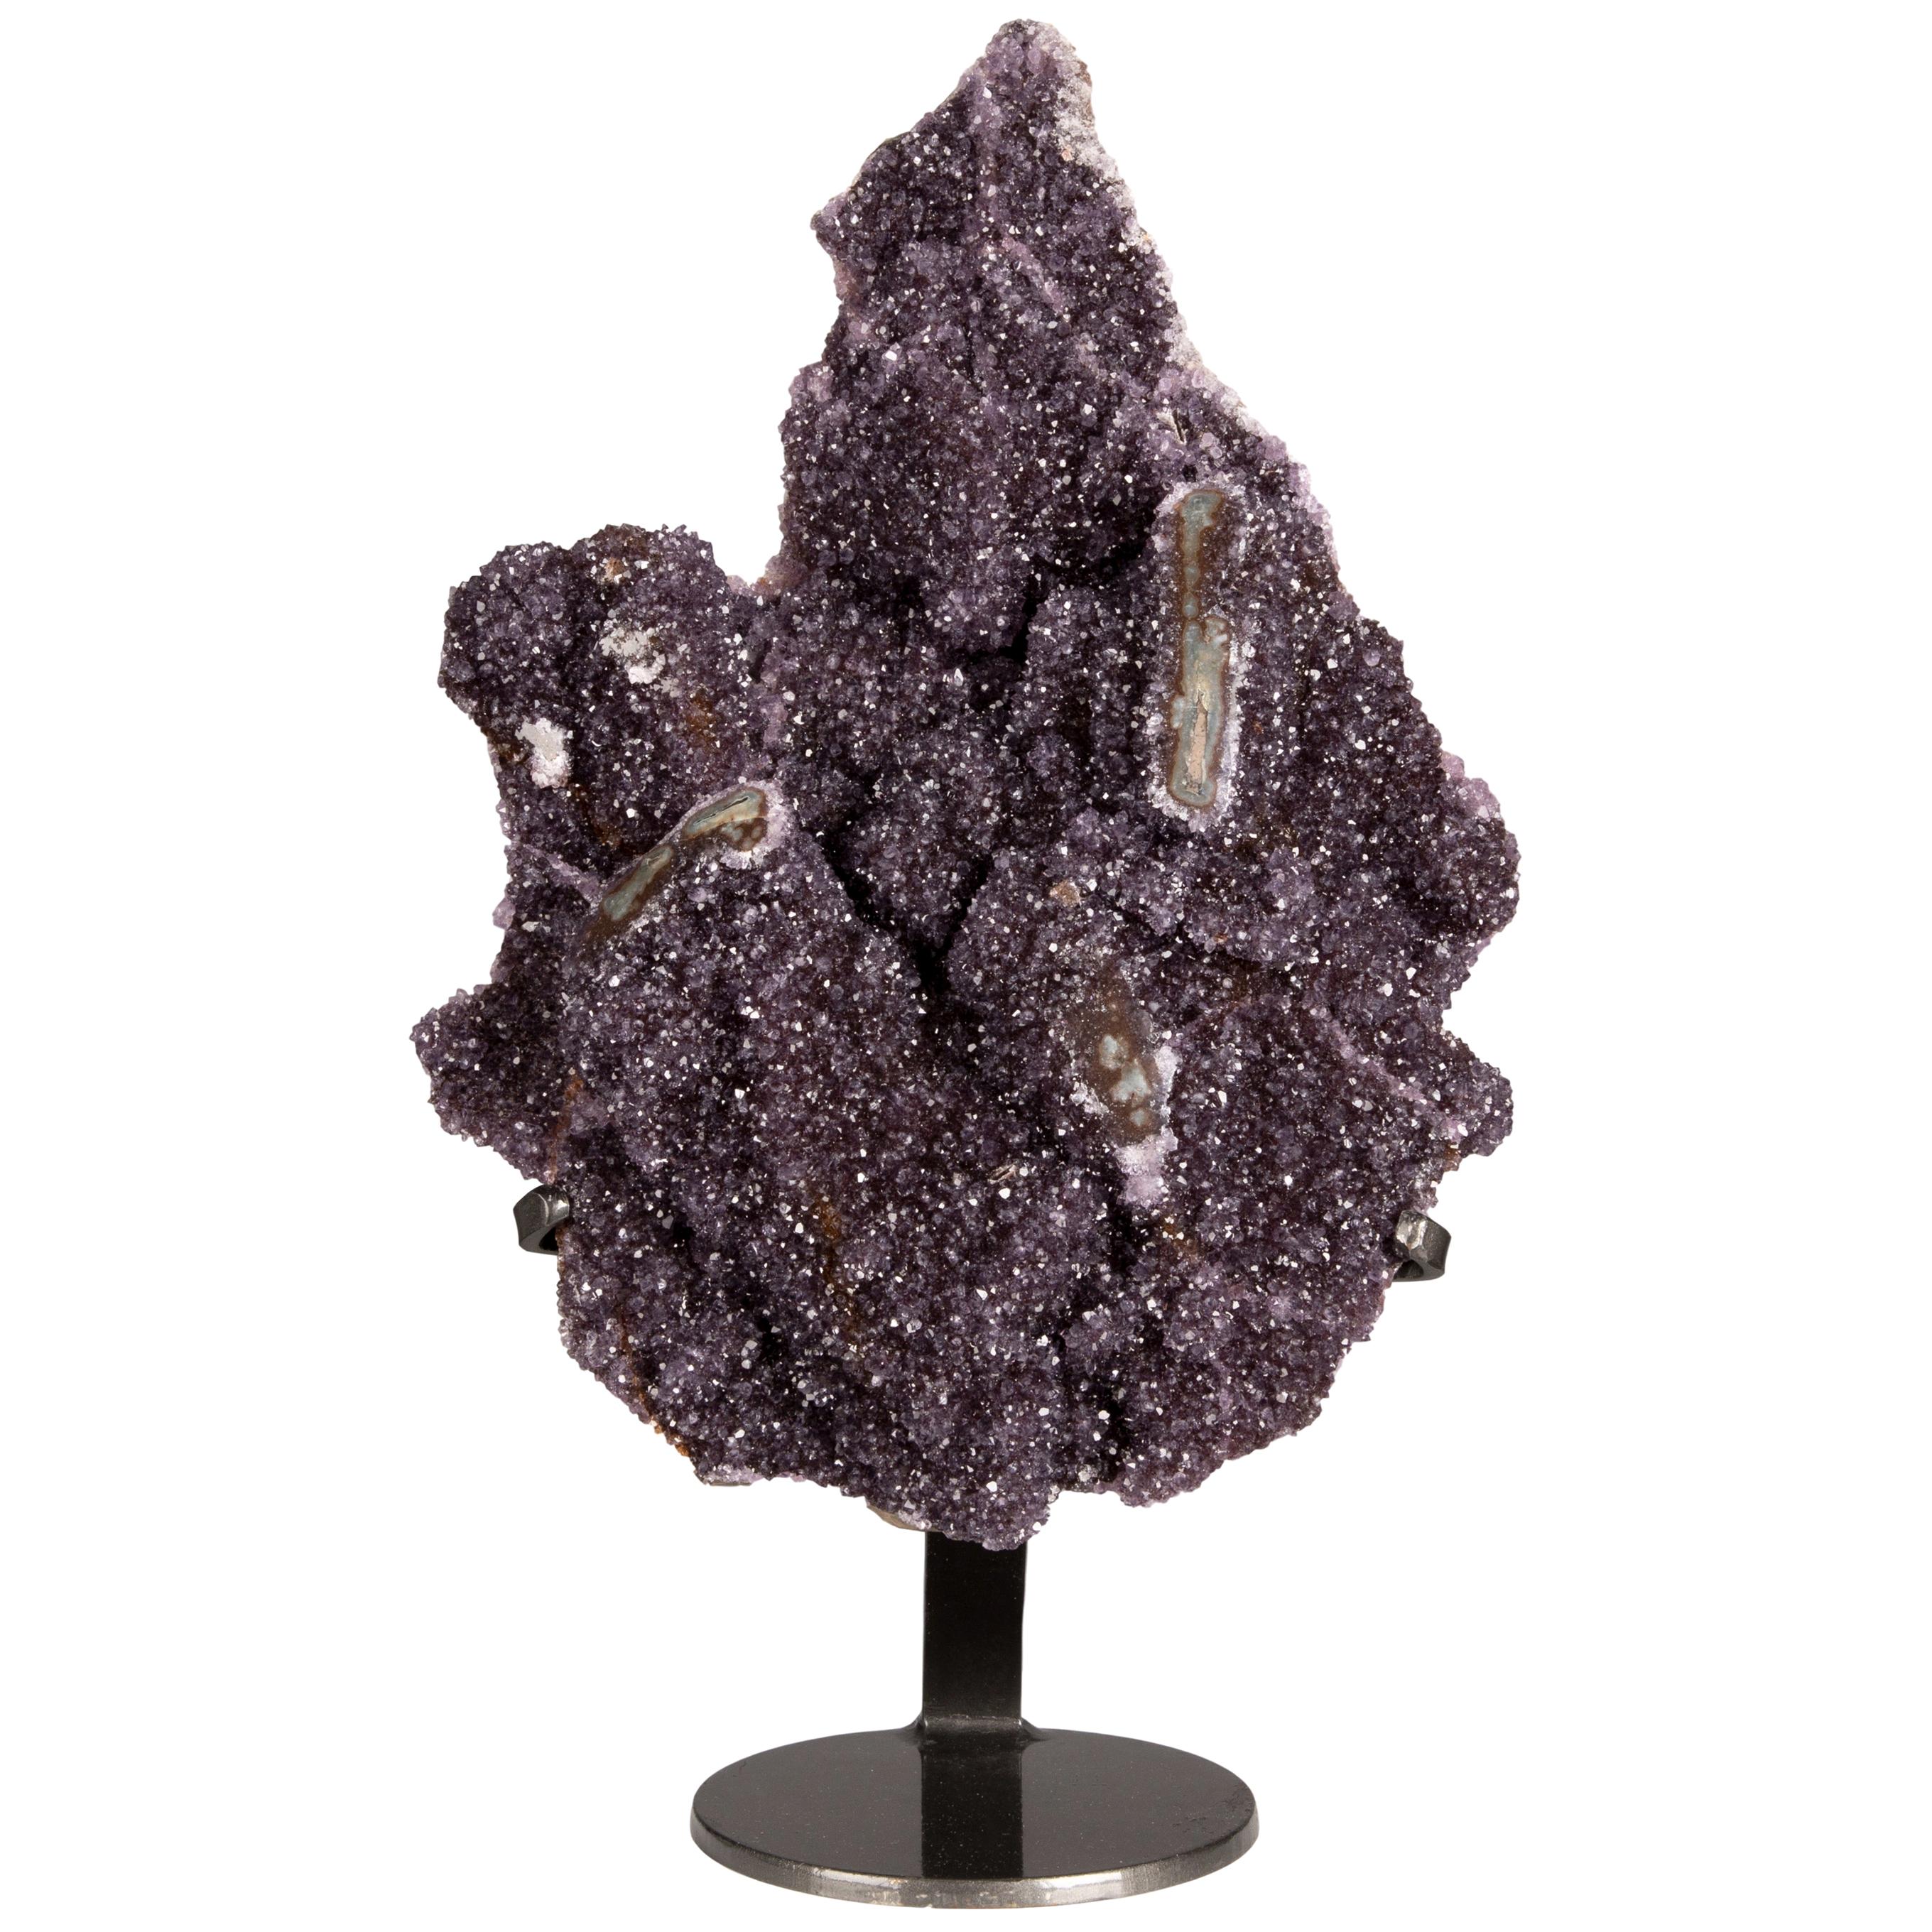 Deep Purple Beautifully Shaped Amethyst Cluster with Stalactites on Metal Stand For Sale